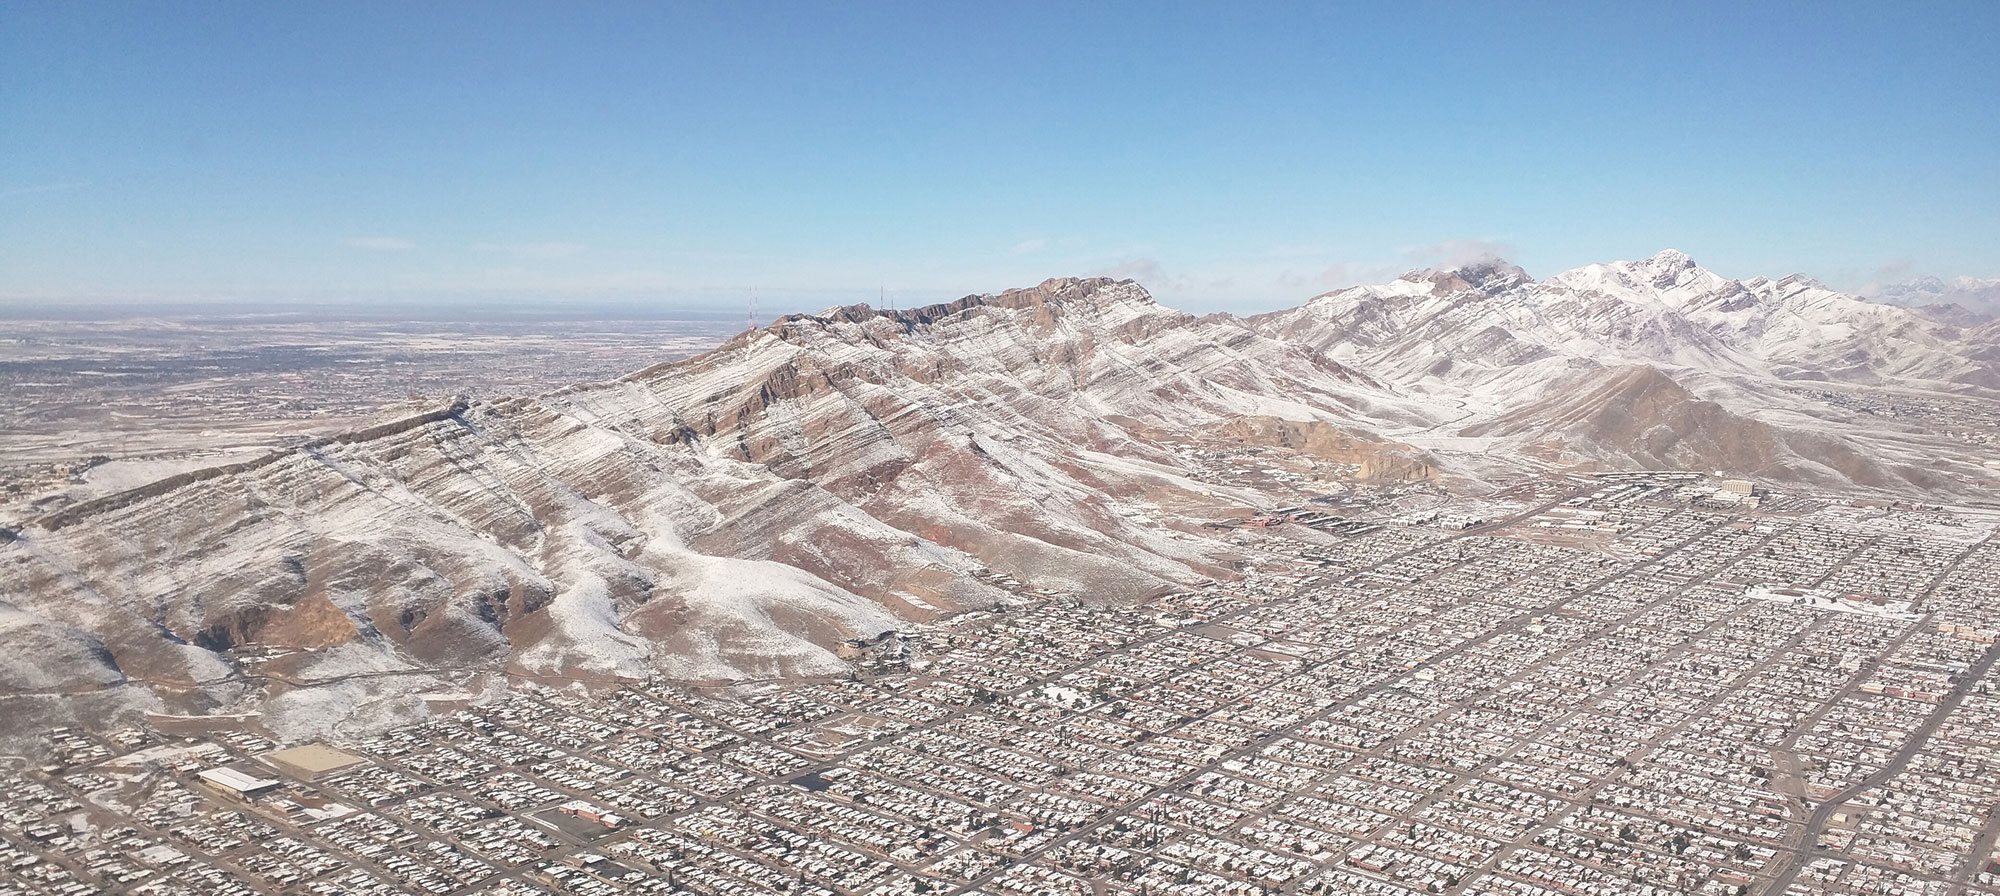 Photograph of the Franklin Mountains in western Texas. The photo shows a mountain range oriented diagonally across the image, with the city of El Paso in the foreground at the foot of the mountains. There is a light dusting of snow.